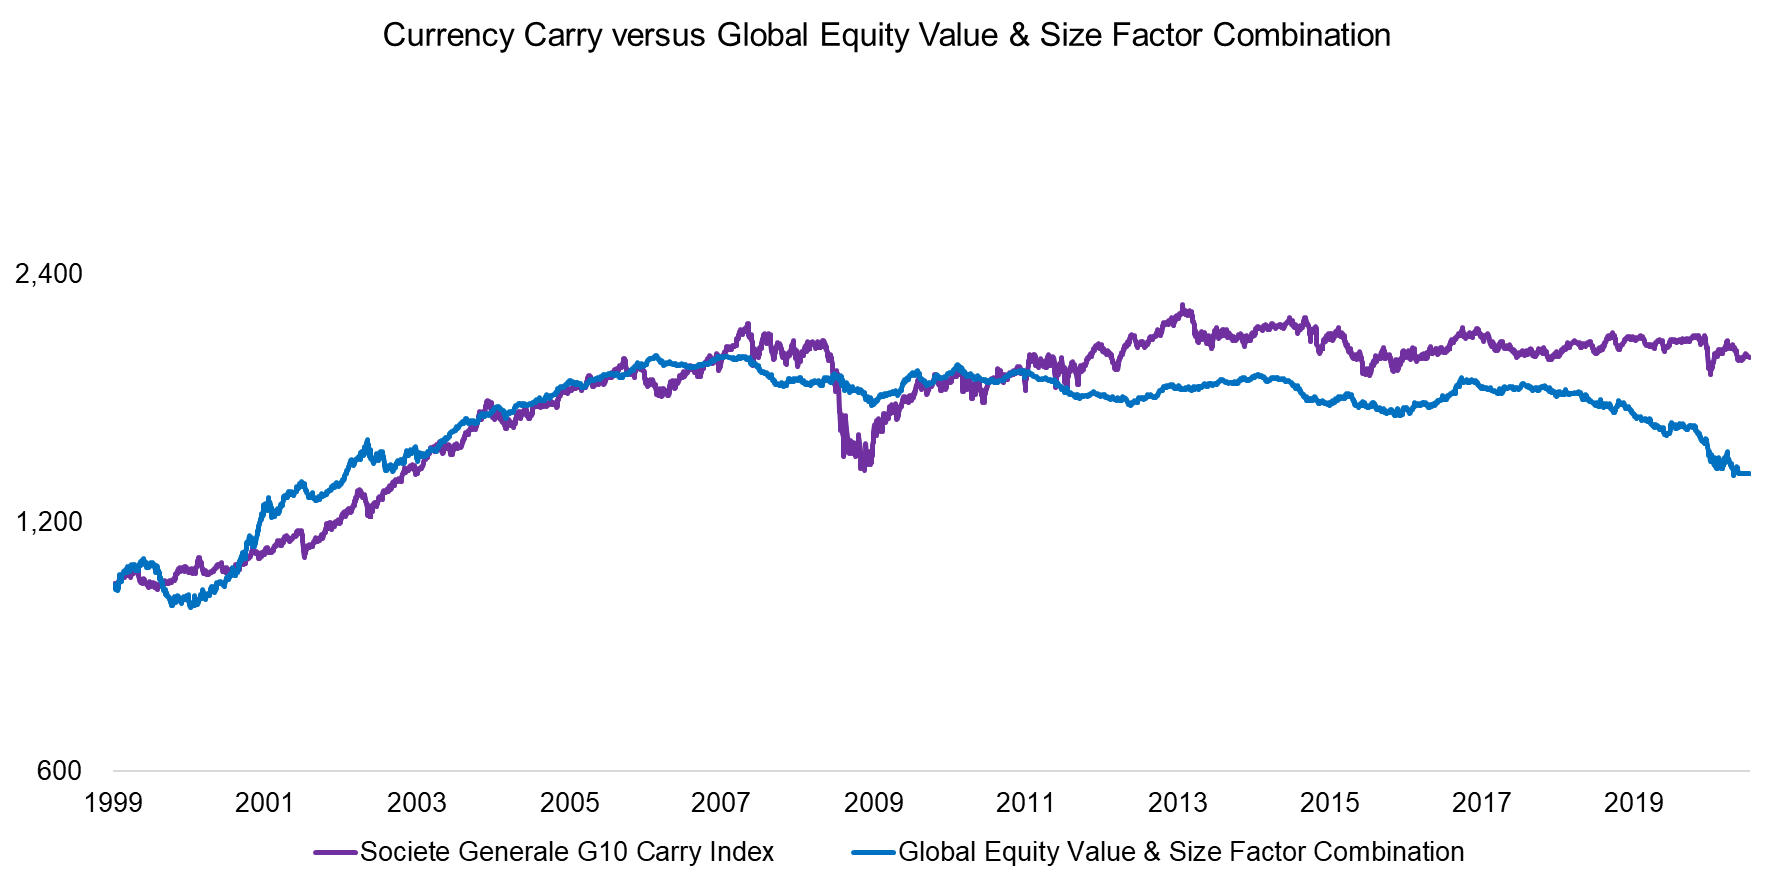 Currency Carry versus Global Equity Value & Size Factor Combination